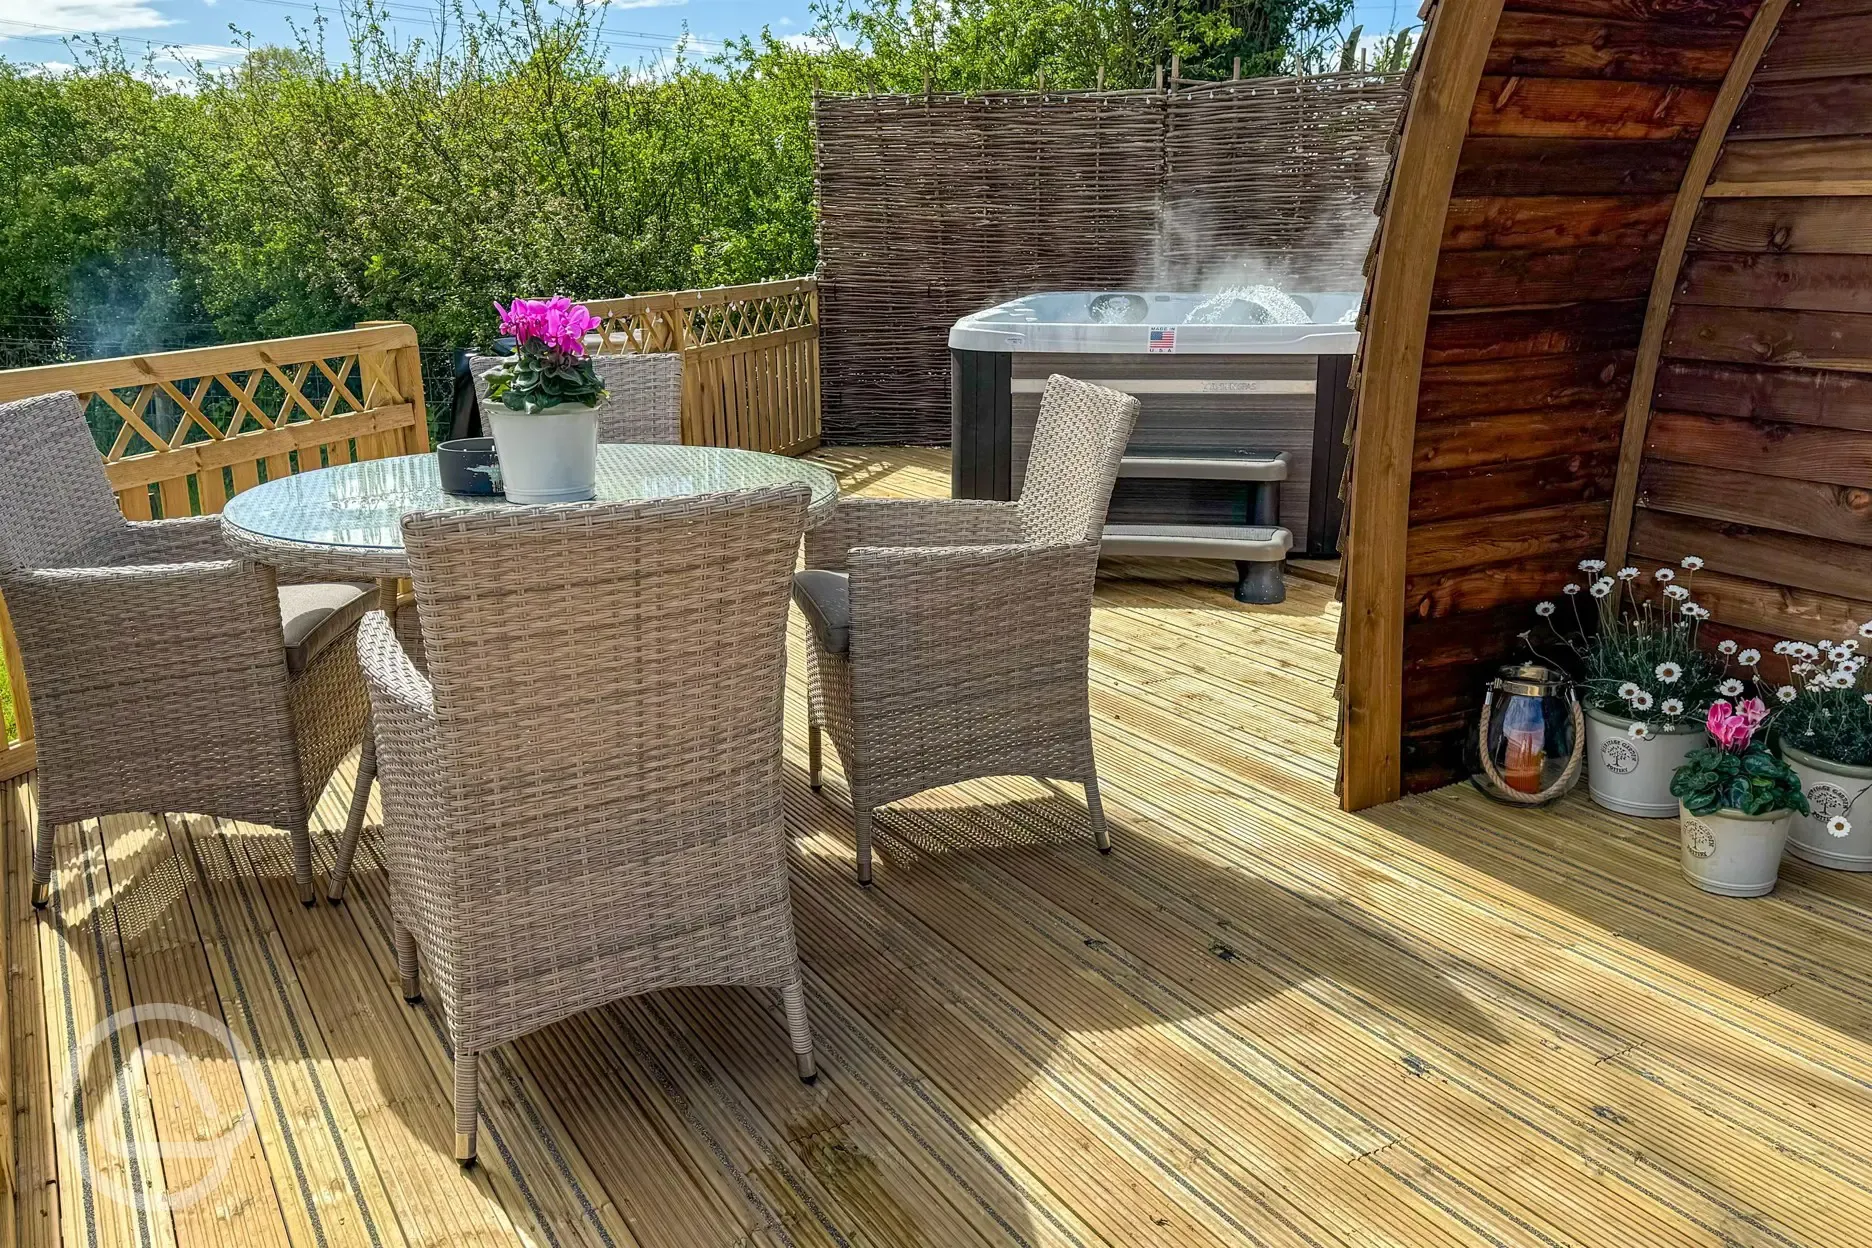 Bowcliffe decking with seating, hot tub and BBQ